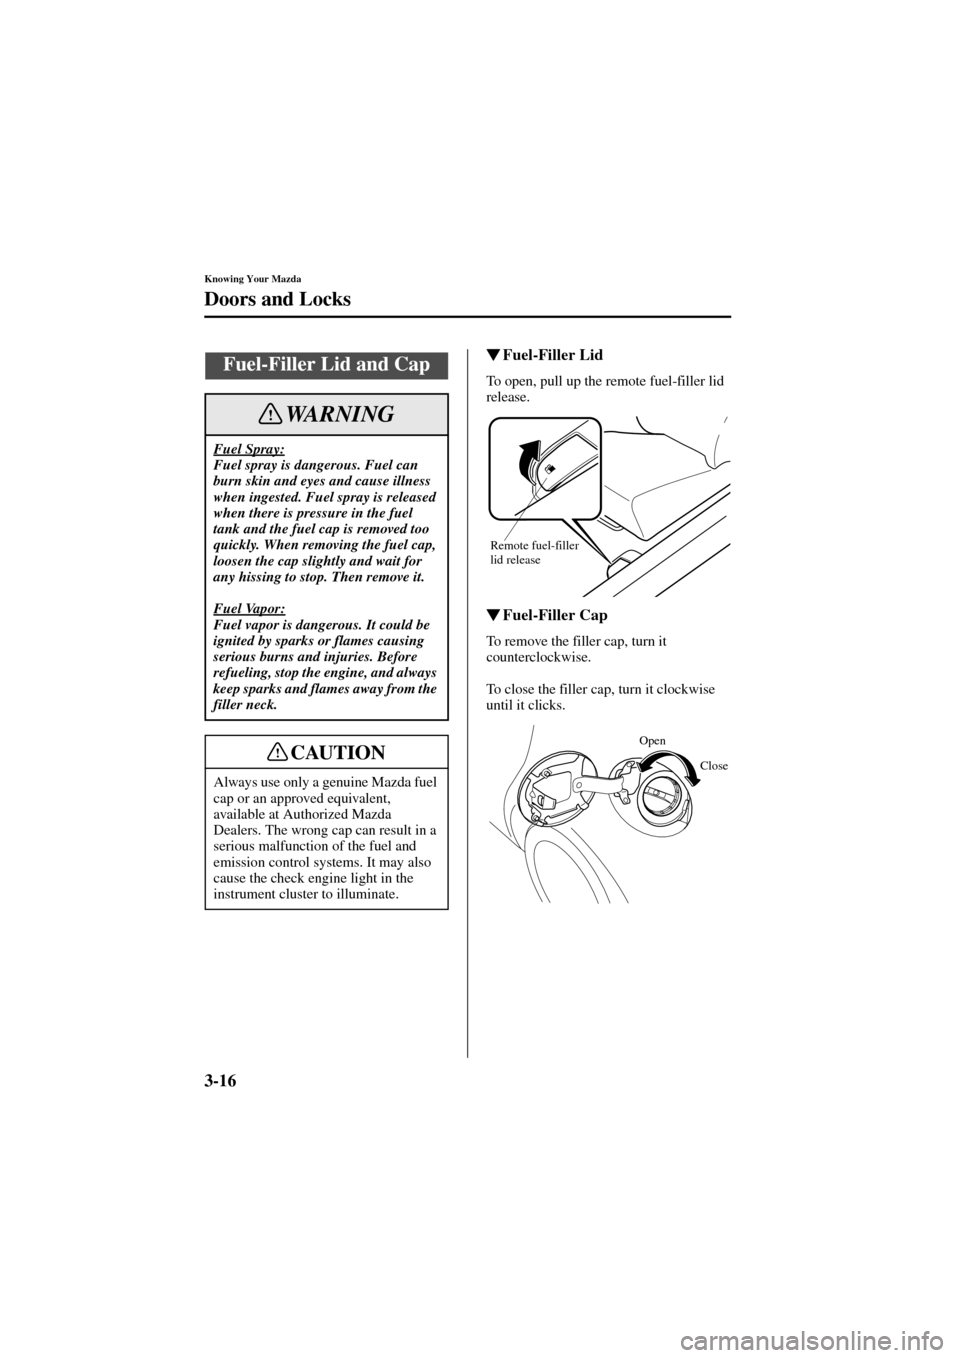 MAZDA MODEL 6 2004   (in English) Service Manual 3-16
Knowing Your Mazda
Doors and Locks
Form No. 8R29-EA-02I
Fuel-Filler Lid
To open, pull up the remote fuel-filler lid 
release.
Fuel-Filler Cap
To remove the filler cap, turn it 
counterclockwise